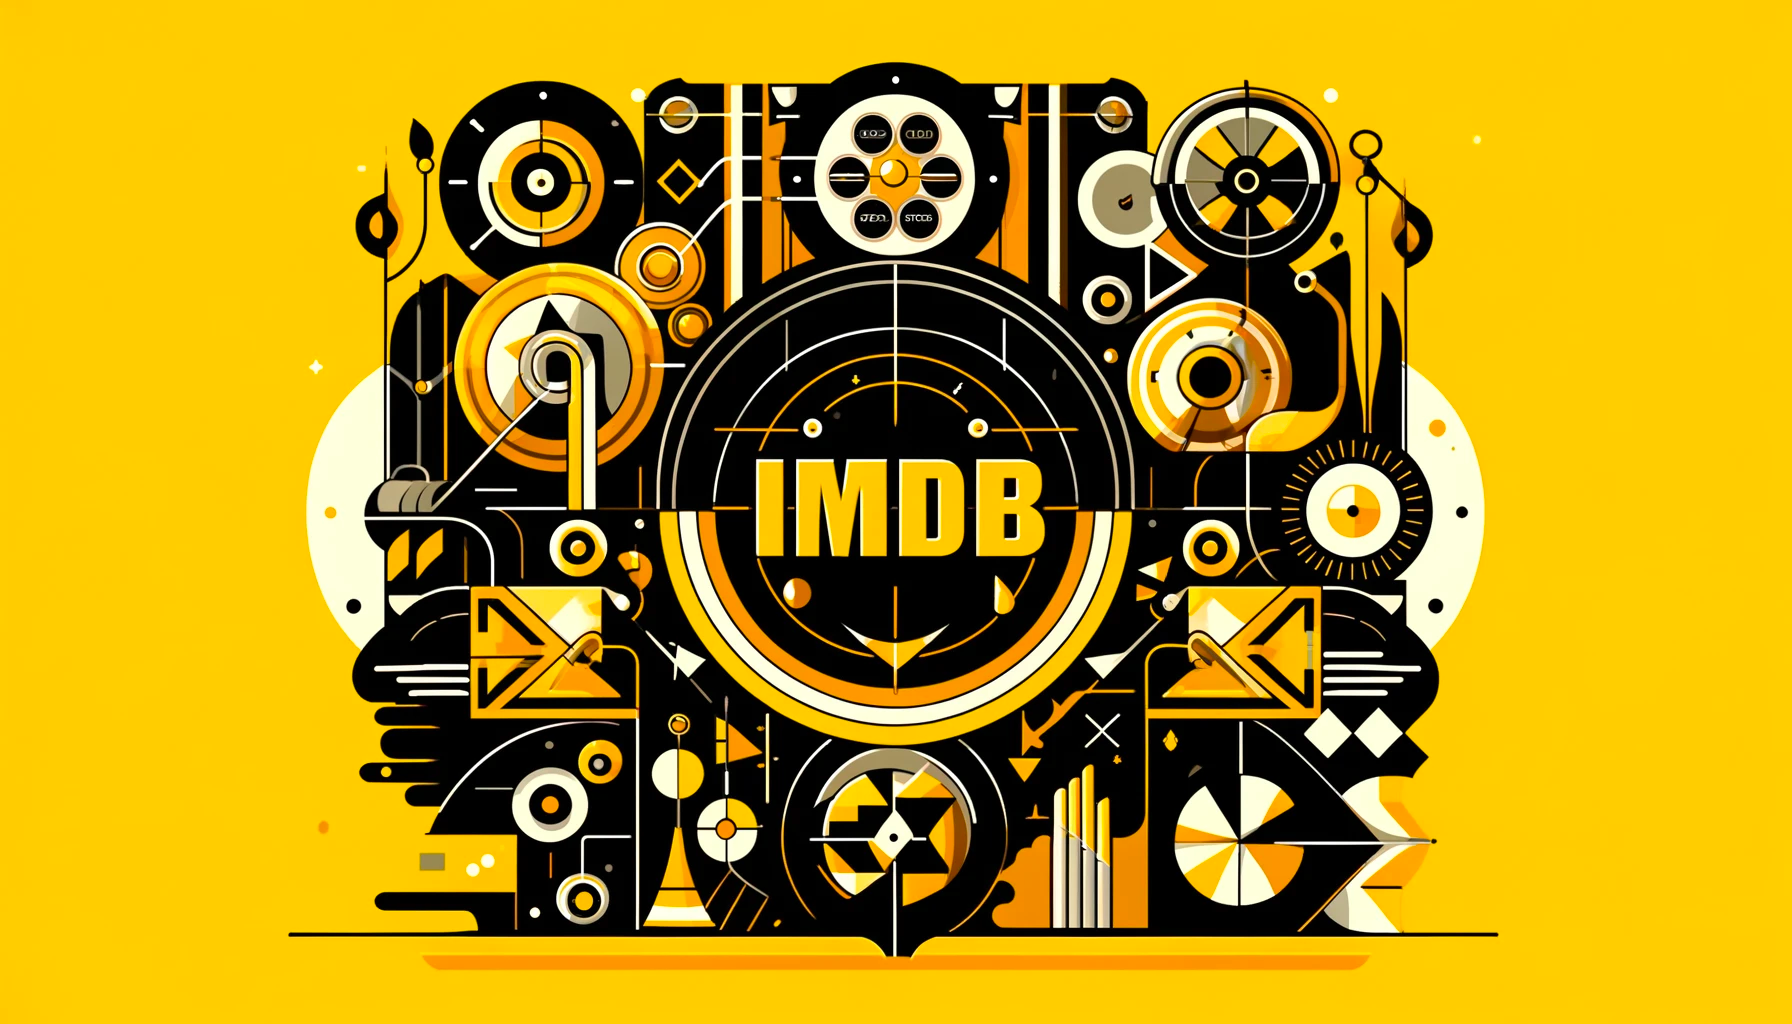       Learn how to scrape data from IMDb step-by-step 👇